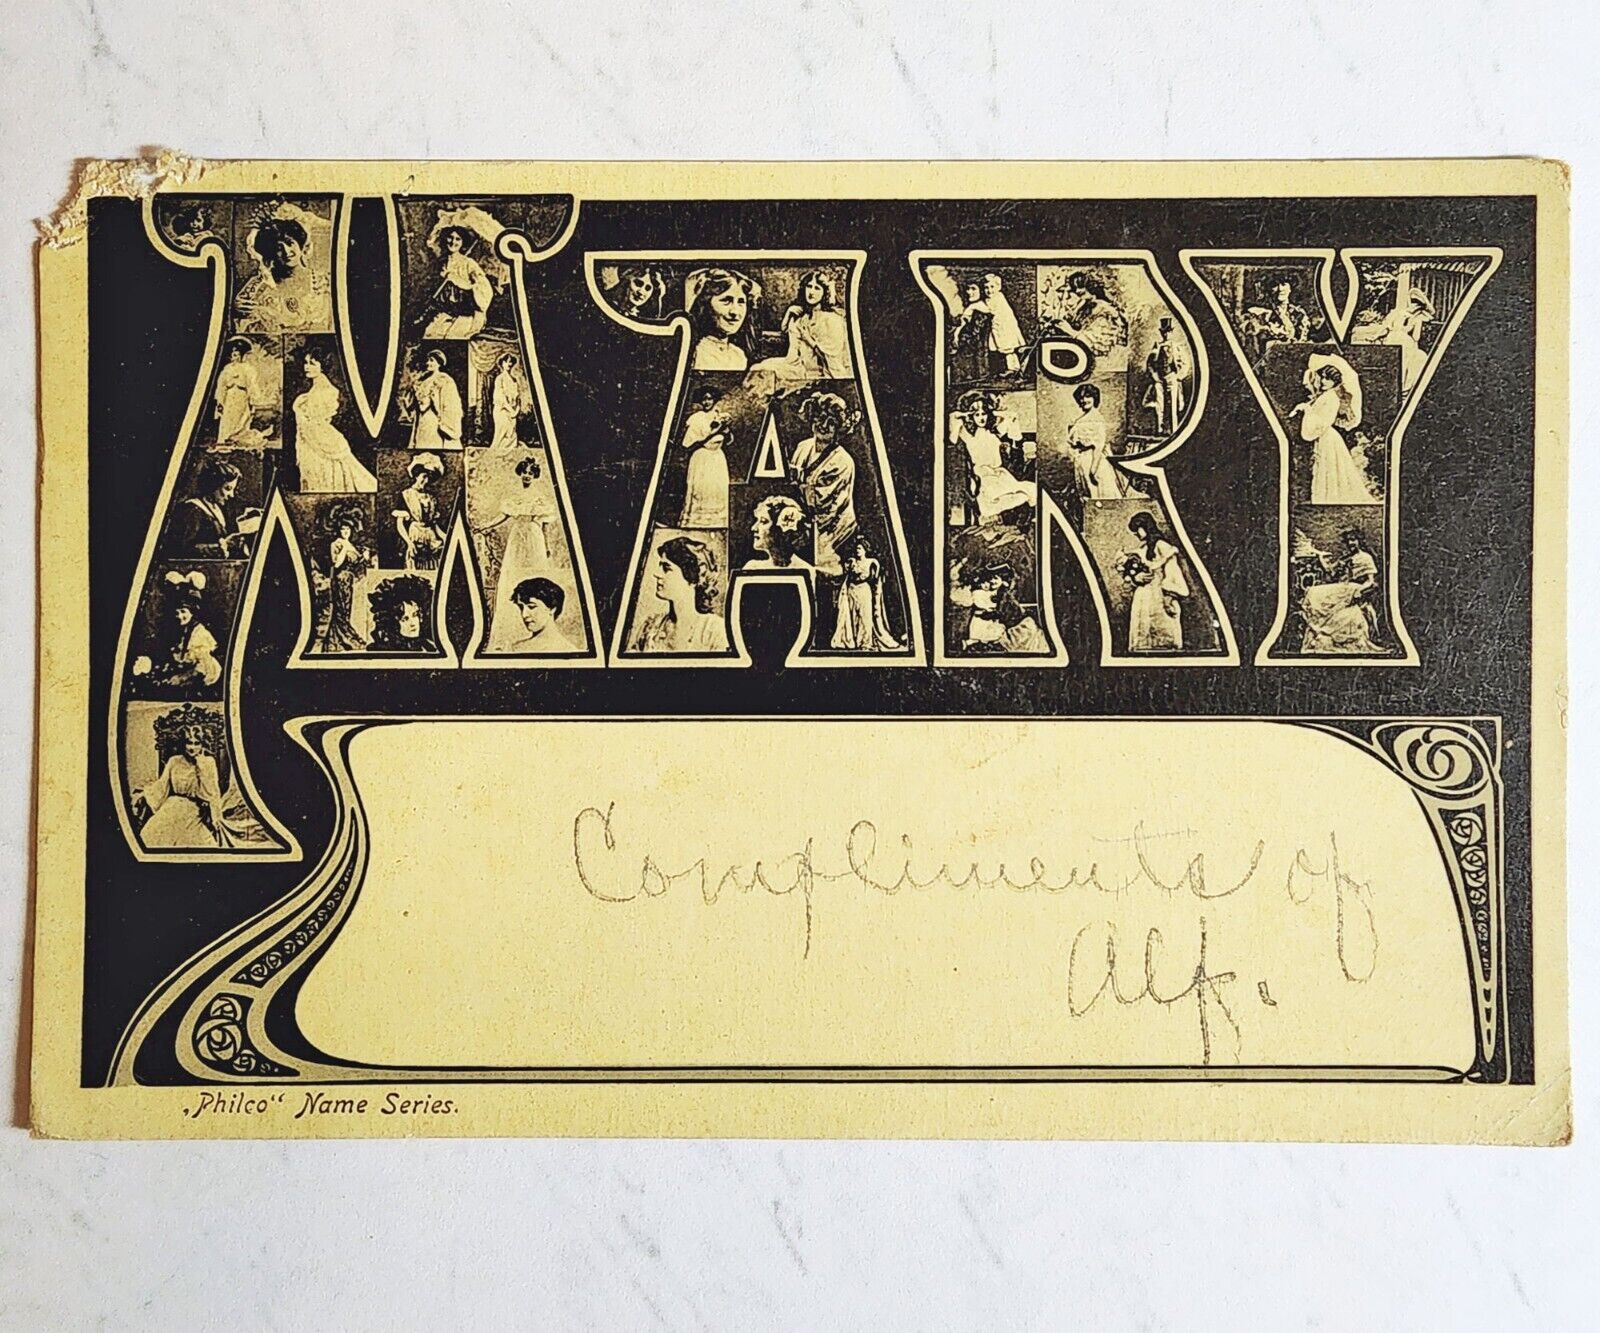 MARY ~ Antique 1906 Large Letter Postcard ~ Philco Name Series